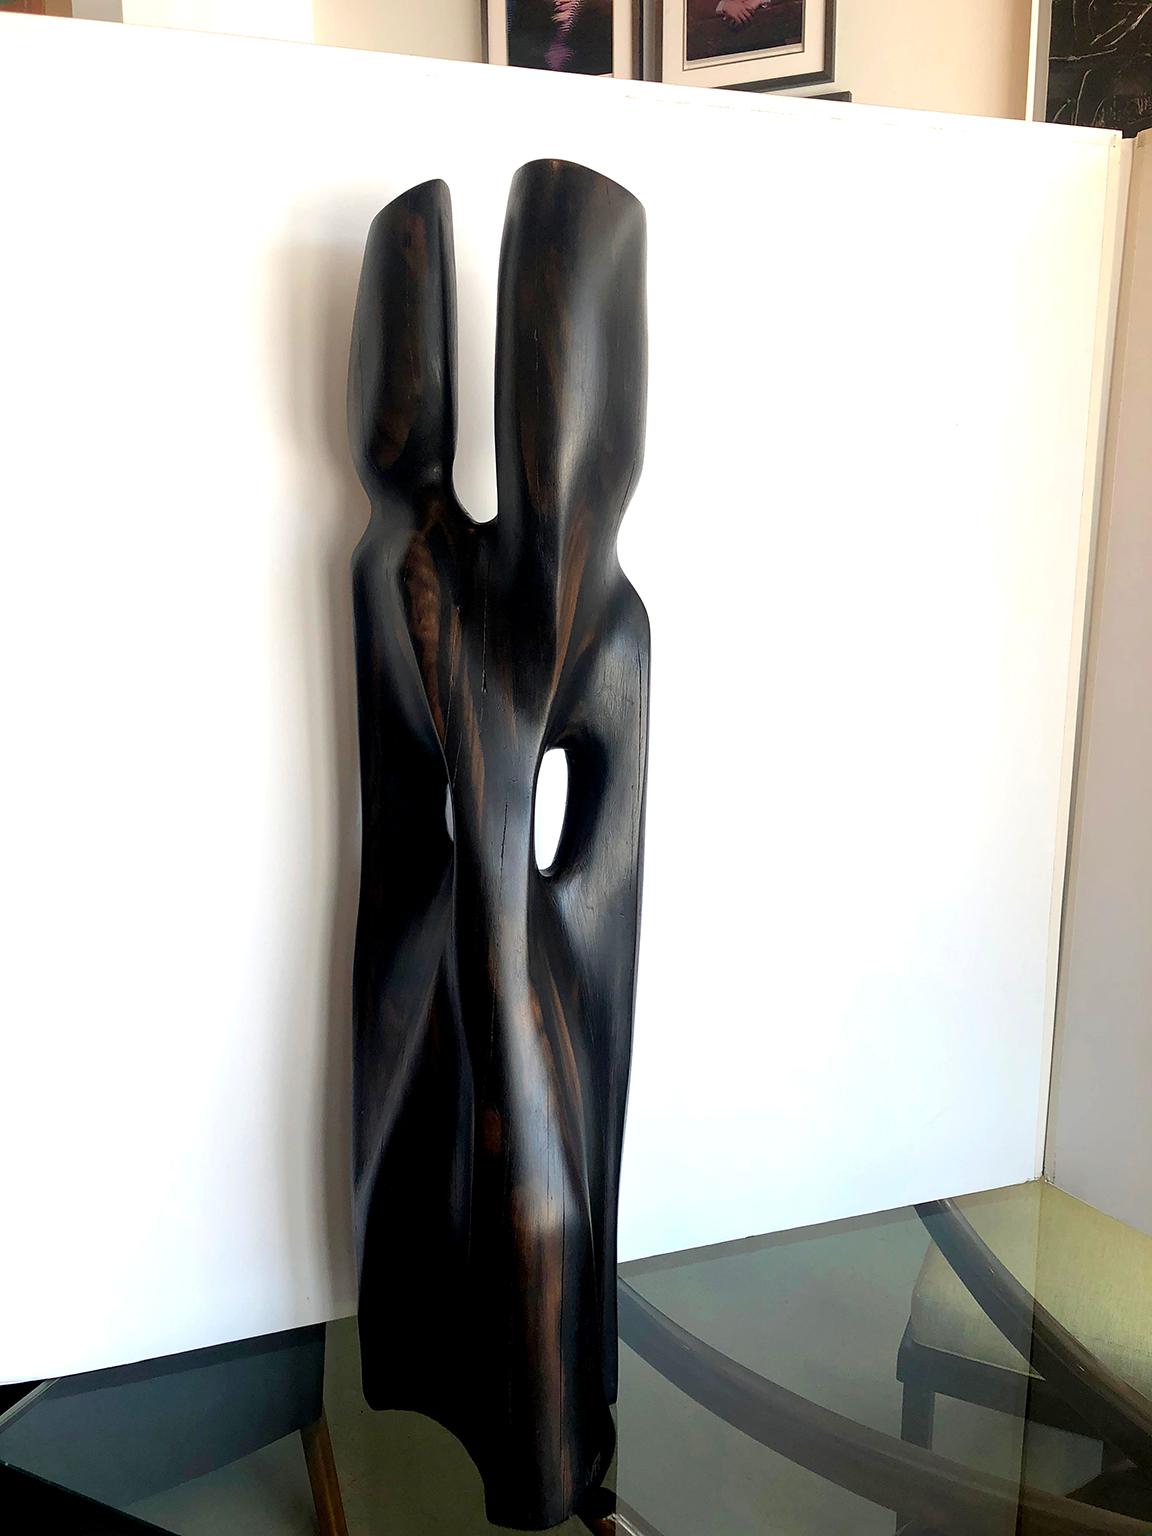 Vintage rosewood sculpture by Raul Varnerin. Abstract figural form carved out of heavy rosewood, mostly black in color with some slightly warmer undertones. (see close up picture for grain).